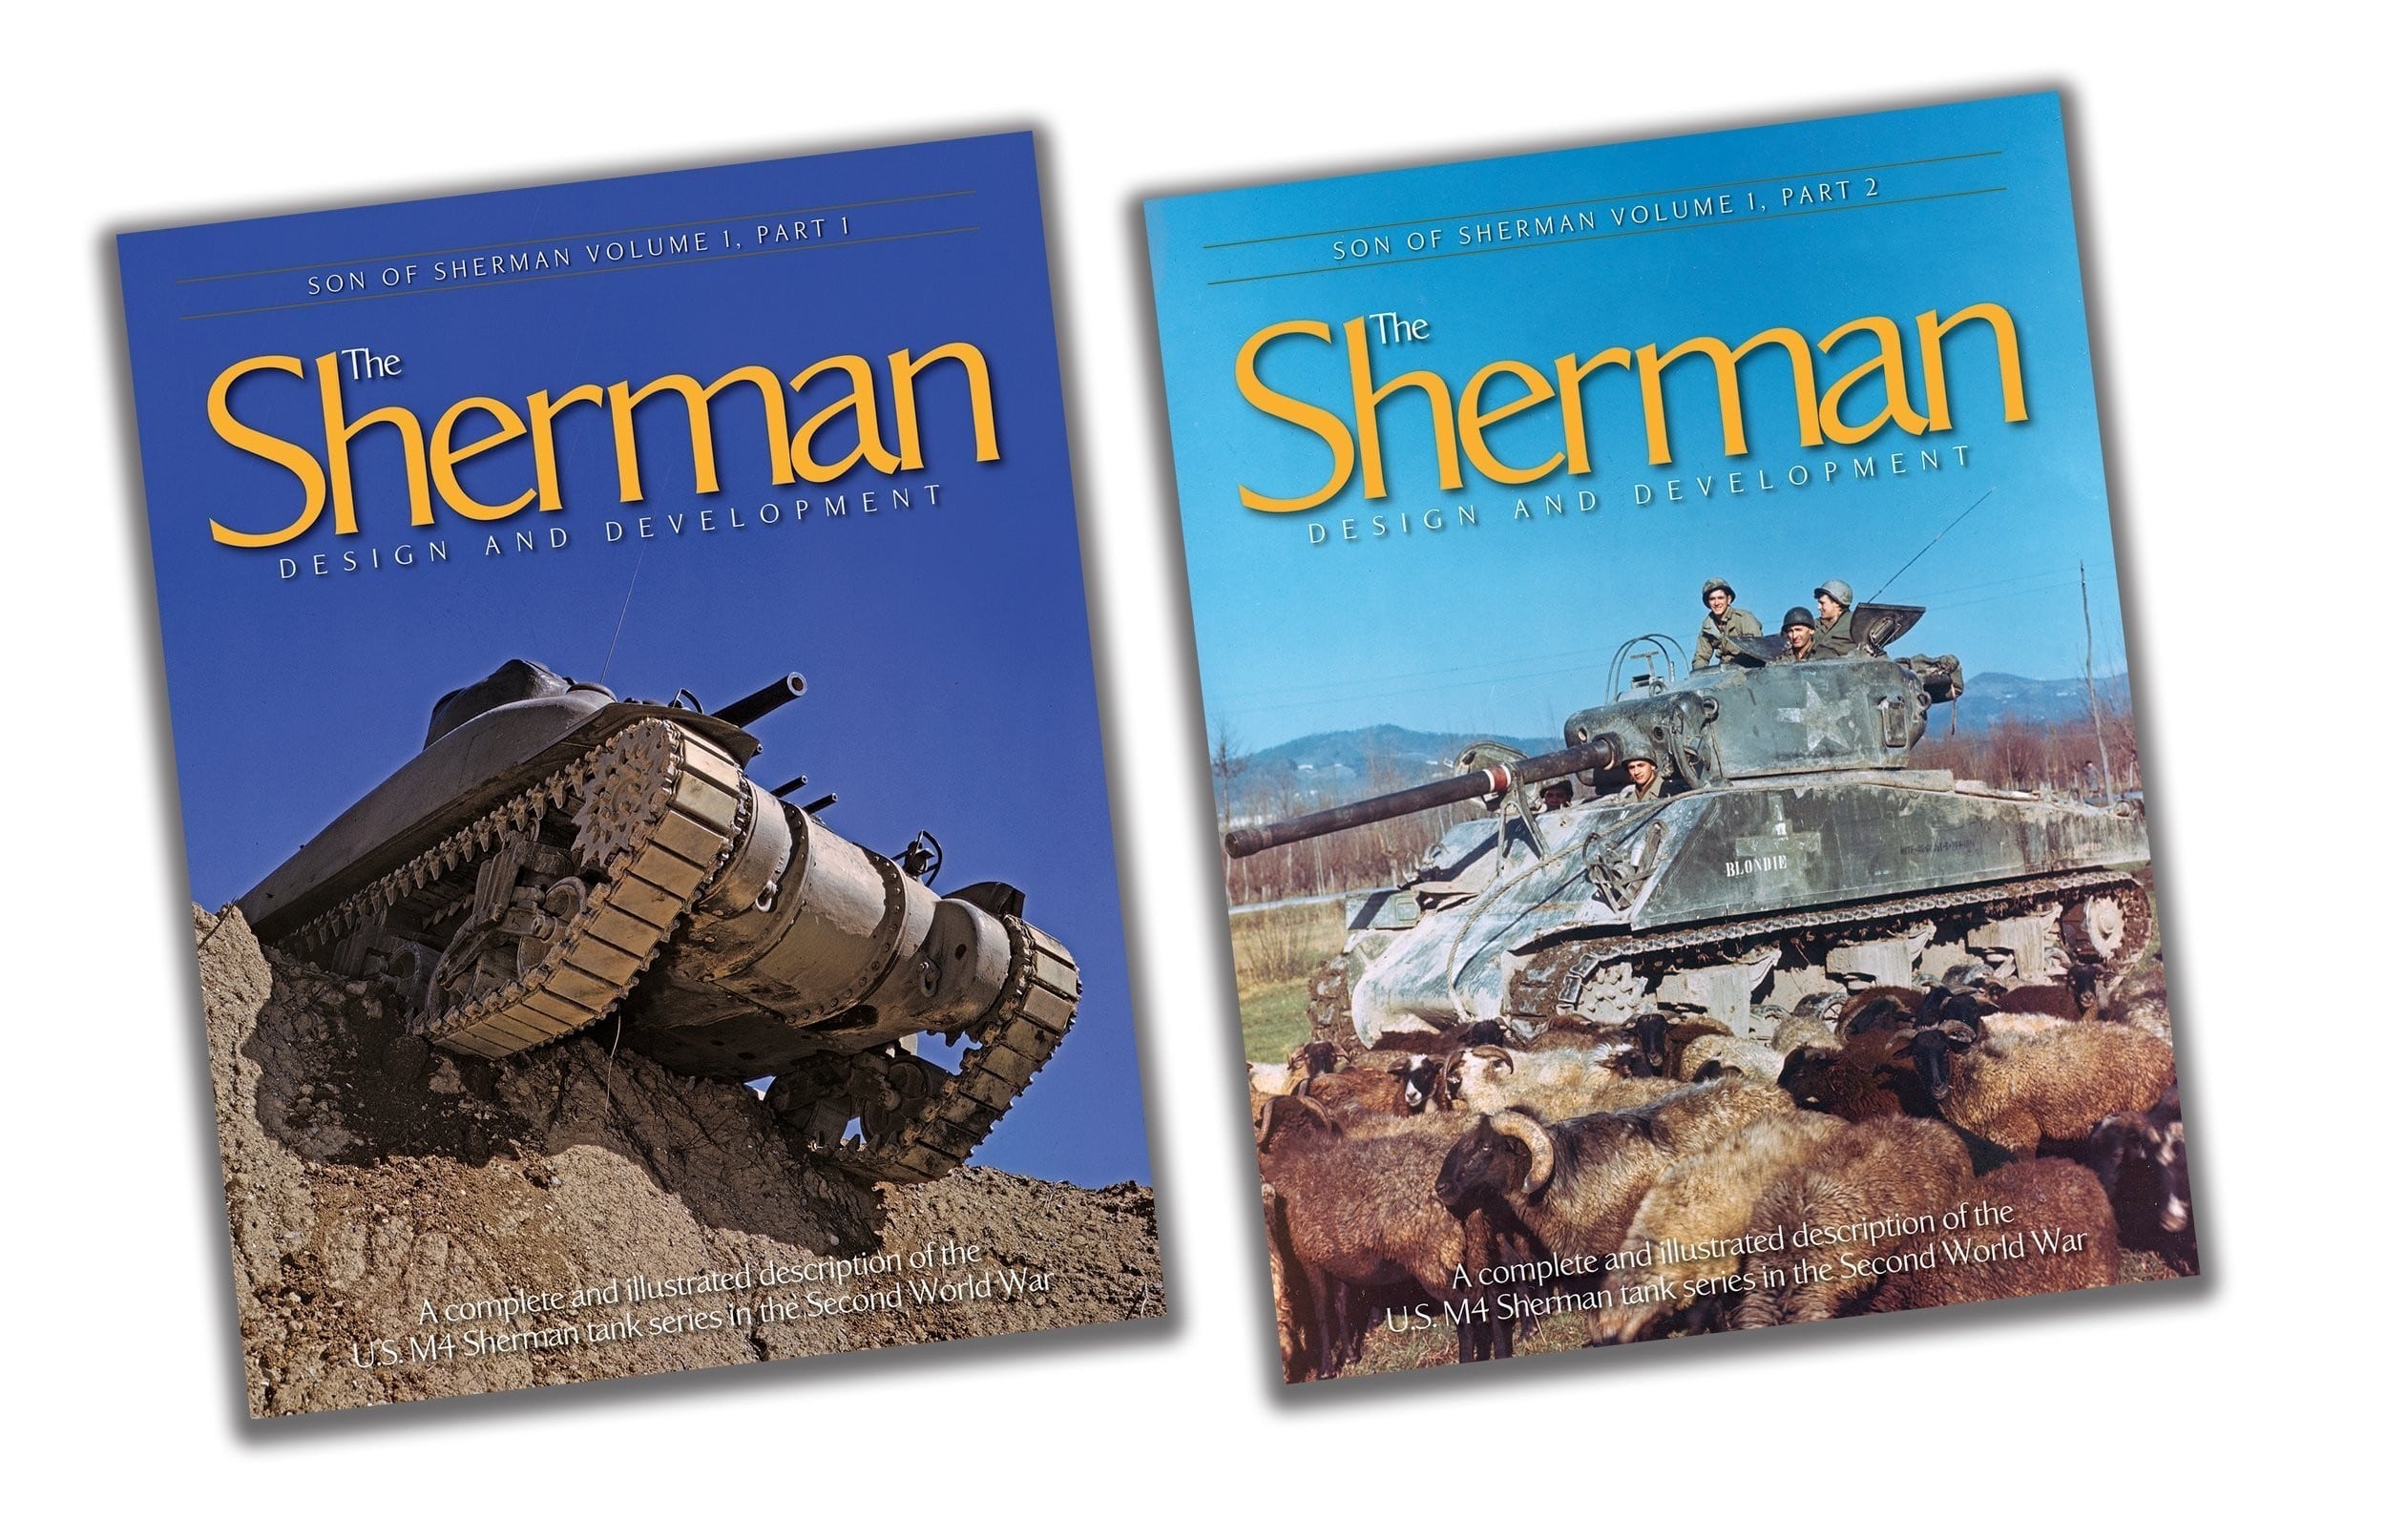 More "Son of Sherman" volumes available from David Doyle Books